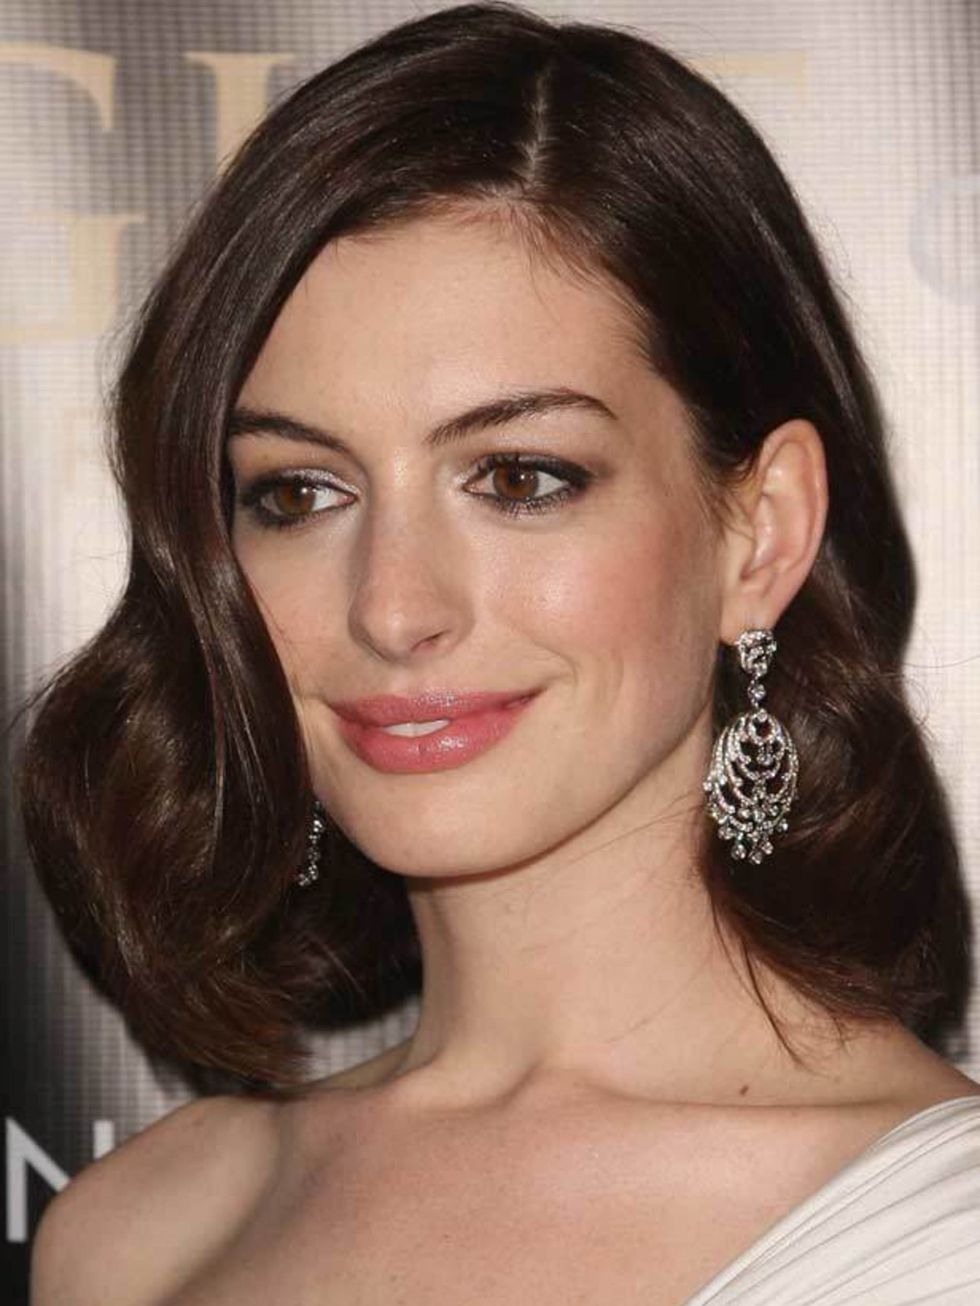 <p><a href="http://www.elleuk.com/beauty/diets/celeb-diets/%28celeb%29/Anne-Hathaway">Click here to read Anne's beauty and diet secrets</a></p>